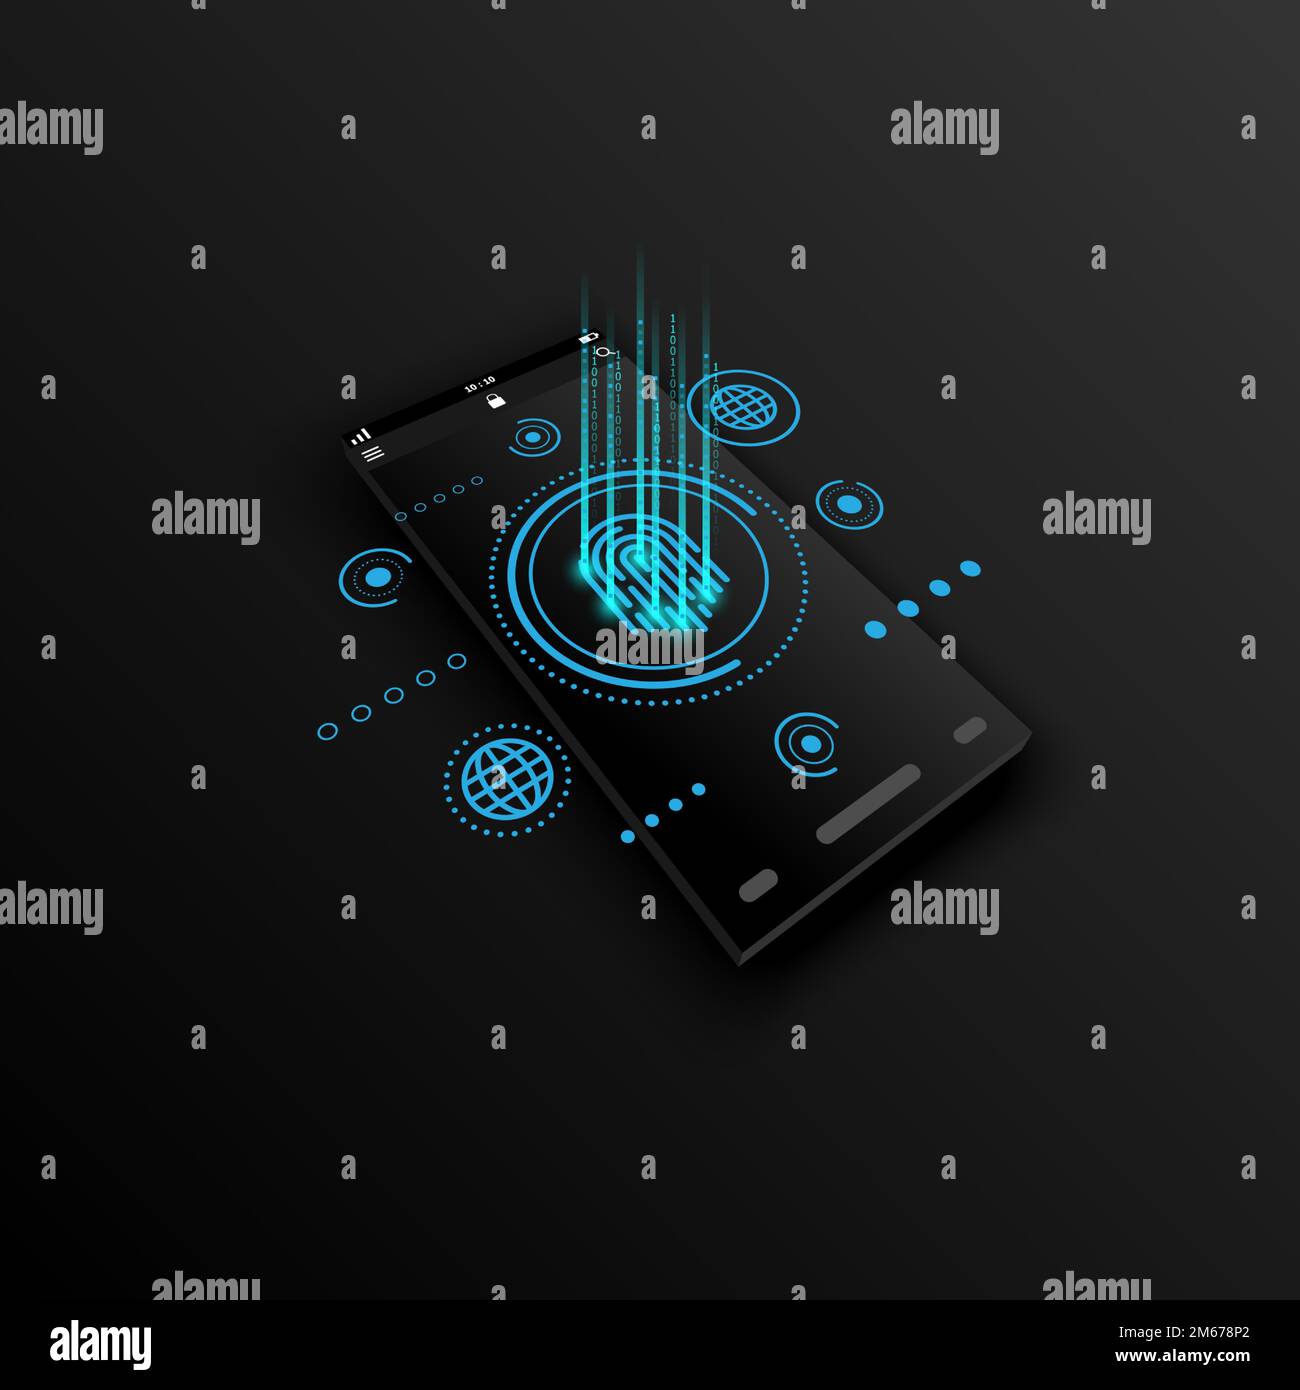 Abstract background with smartphone technology concept, stock vetor Stock Vector